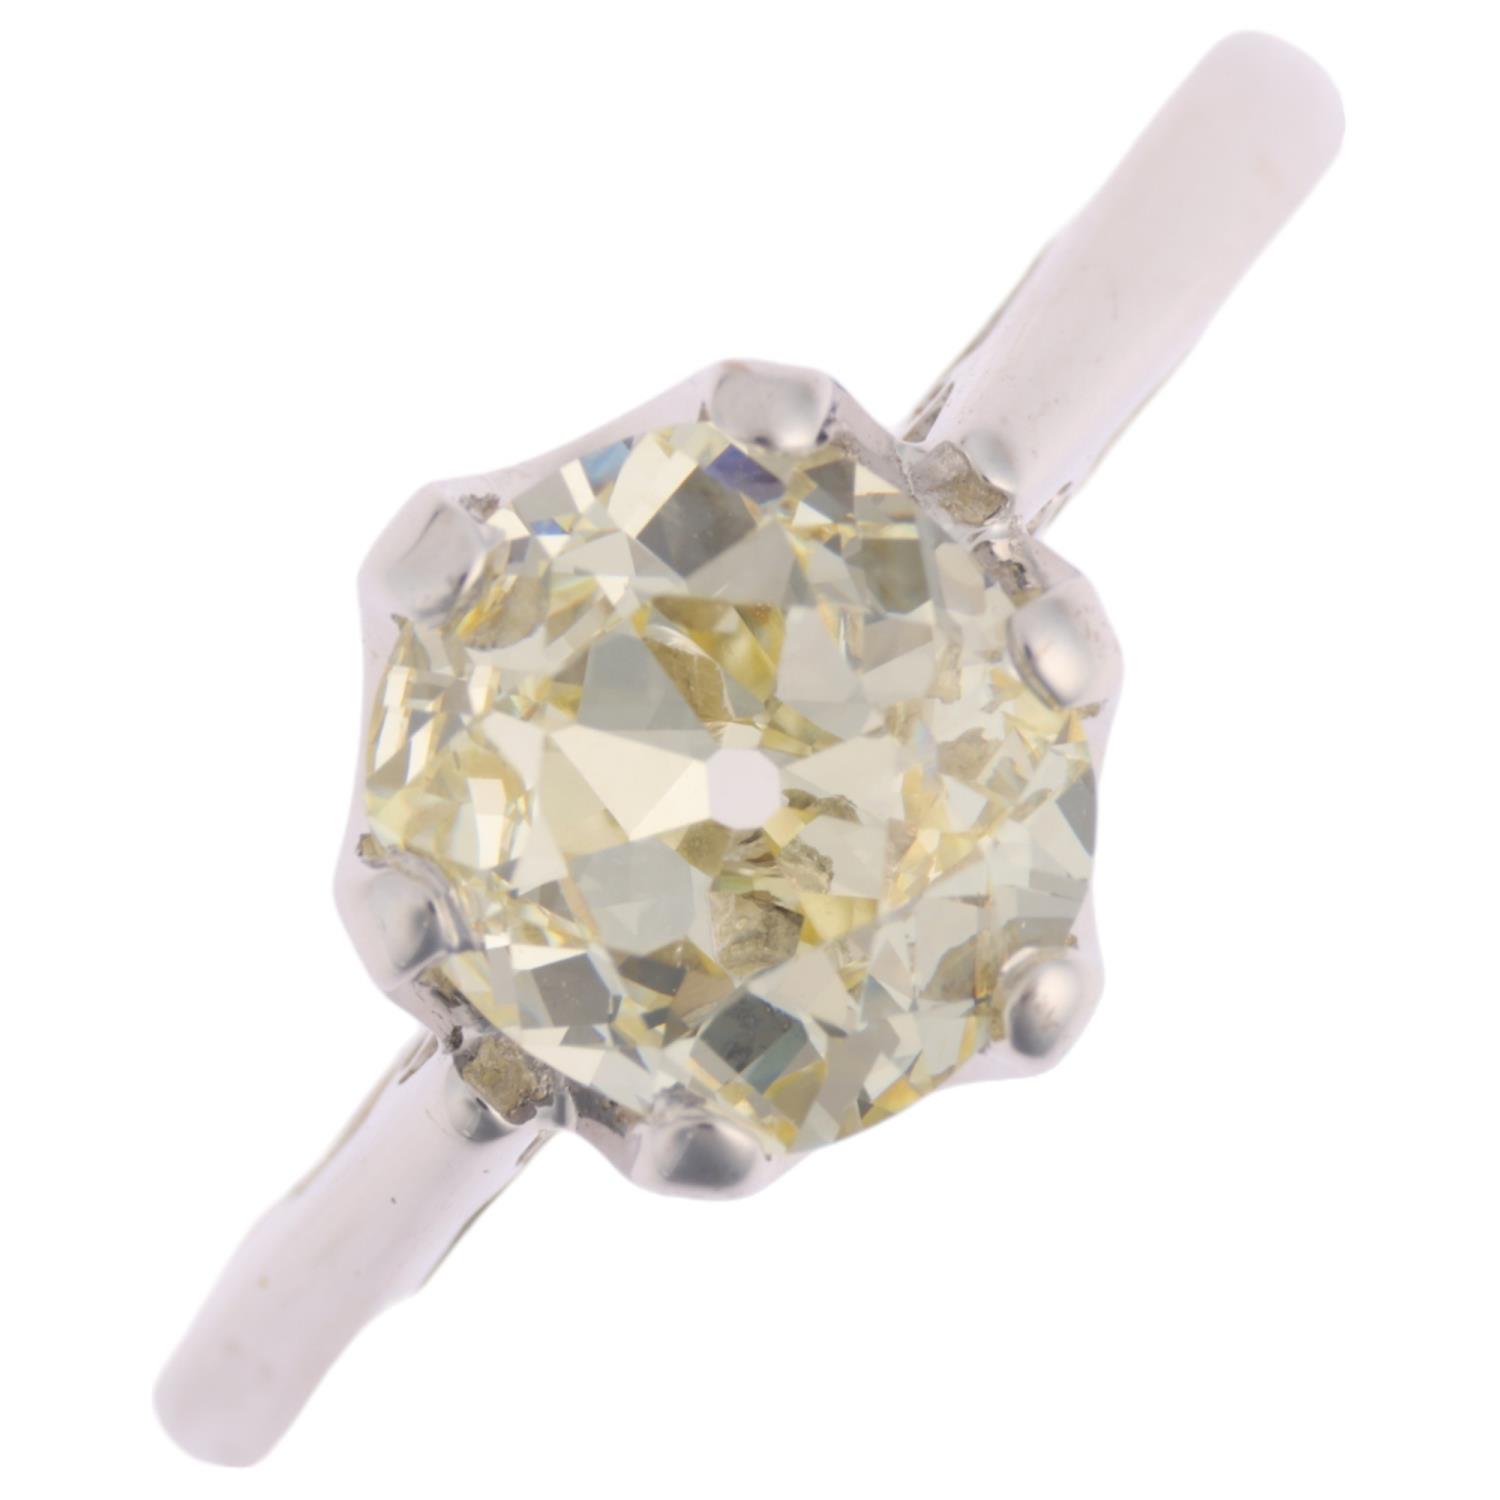 An 18ct white gold 1.9ct solitaire diamond ring, claw set with 1.9ct light yellow old-cut diamond,